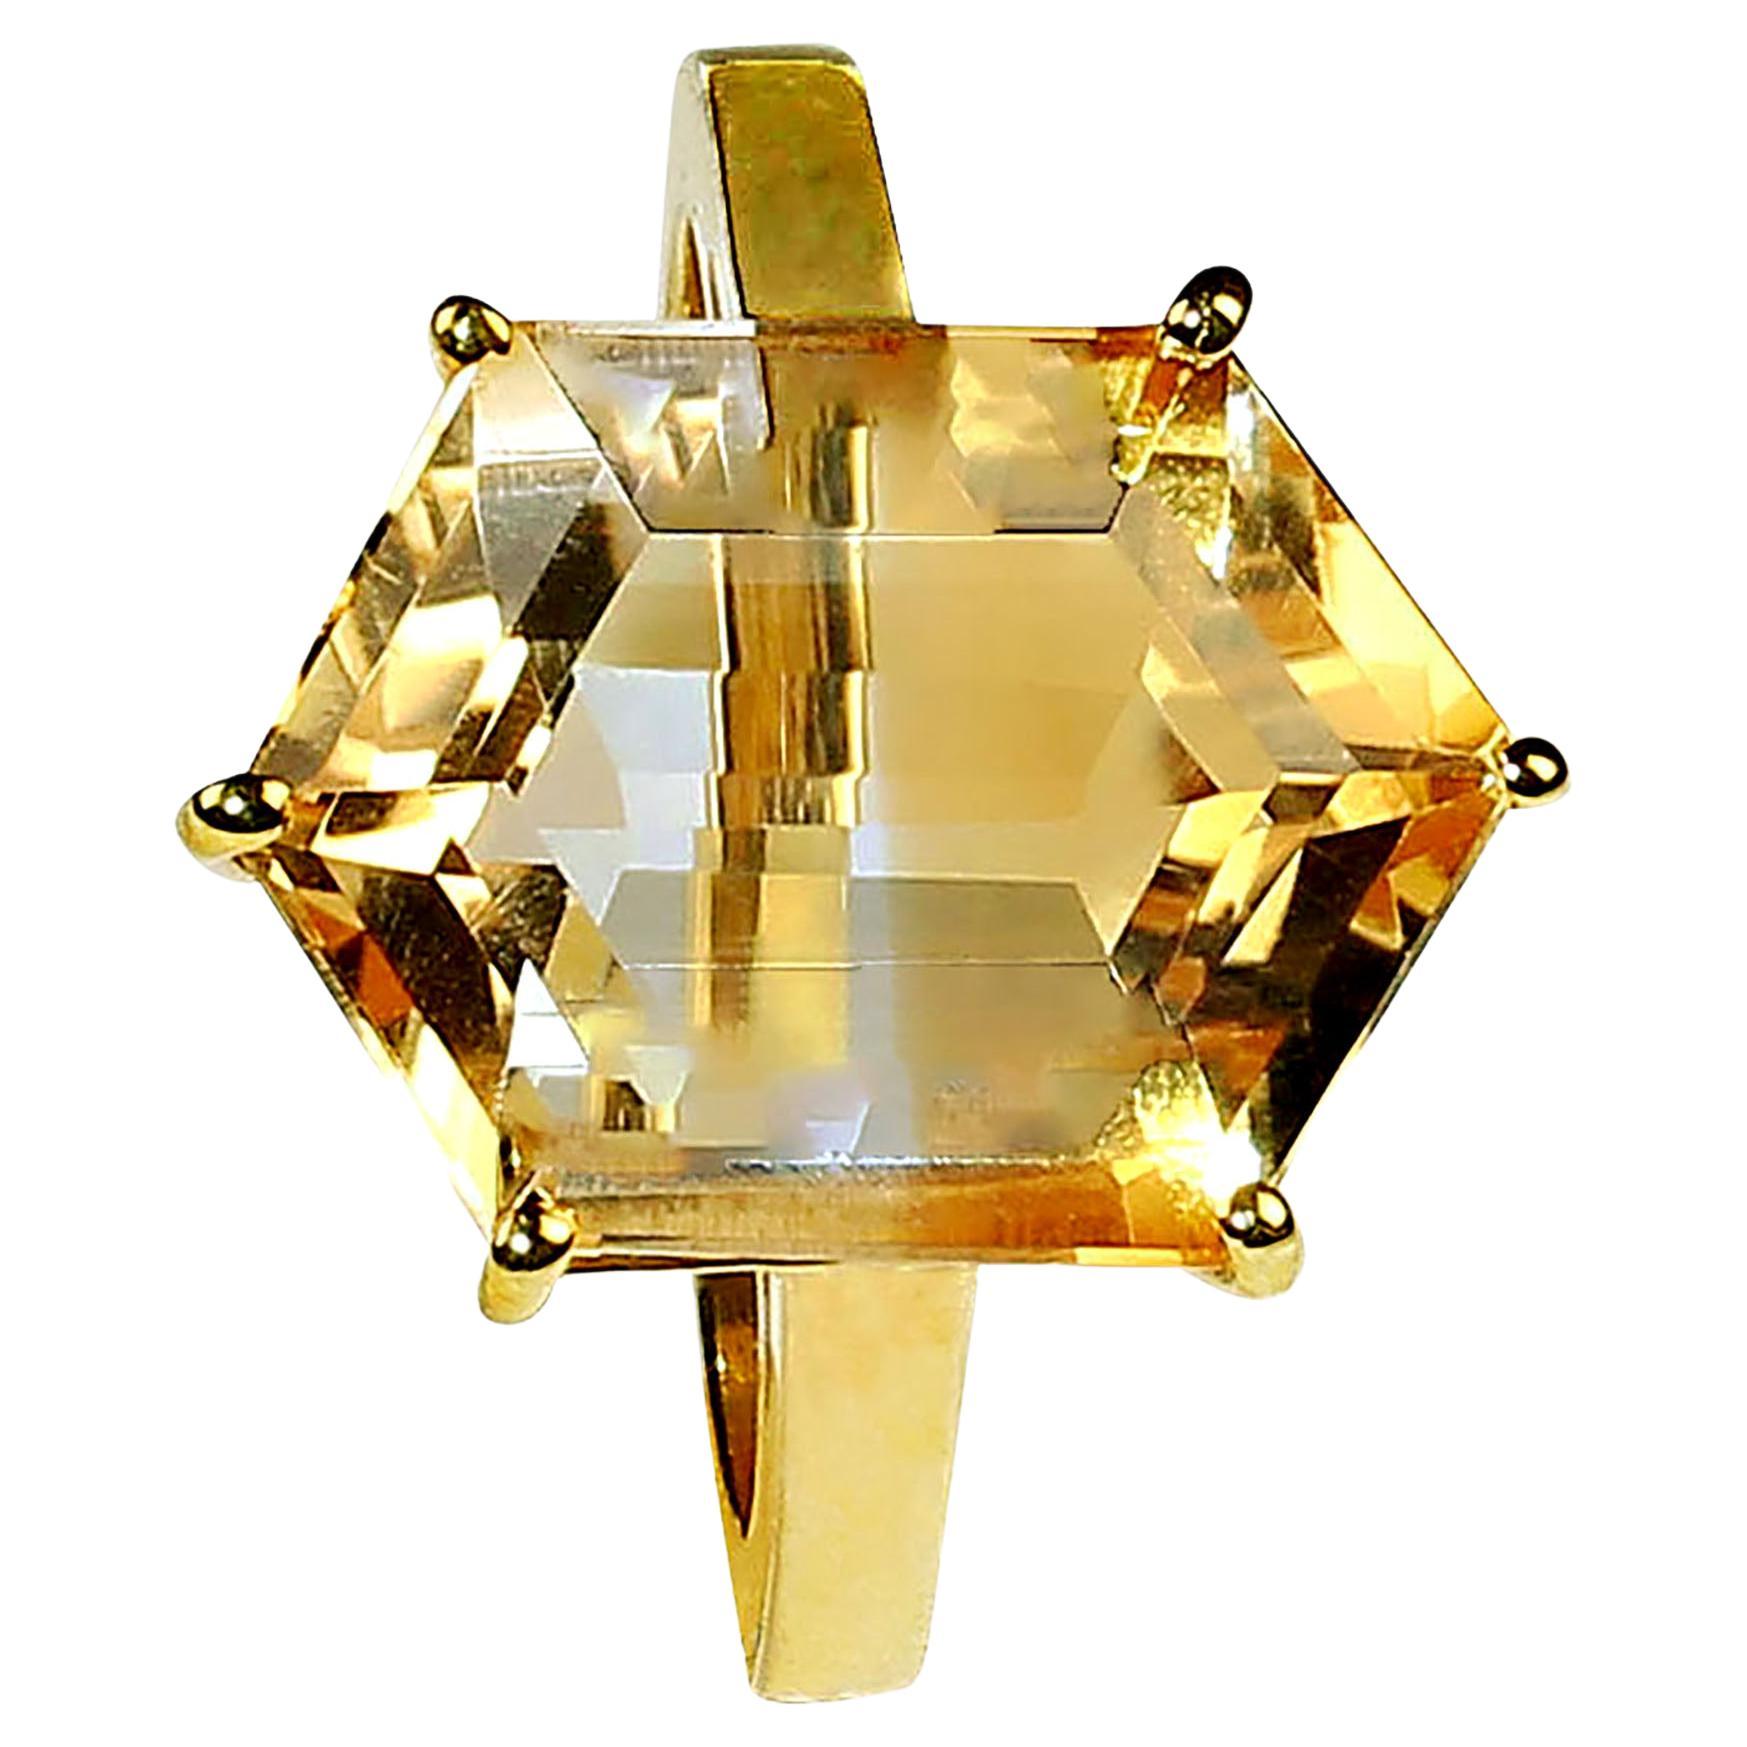 Elegant shield shaped bi-color Citrine set in gold rhodium over Sterling Silver ring.  This 9.56ct gemstone is a true sparkler!  It comes from one of our favorite vendors in Belo Horizonte, Minas Gerais, Brazil.The ancient Greeks and Romans enjoyed